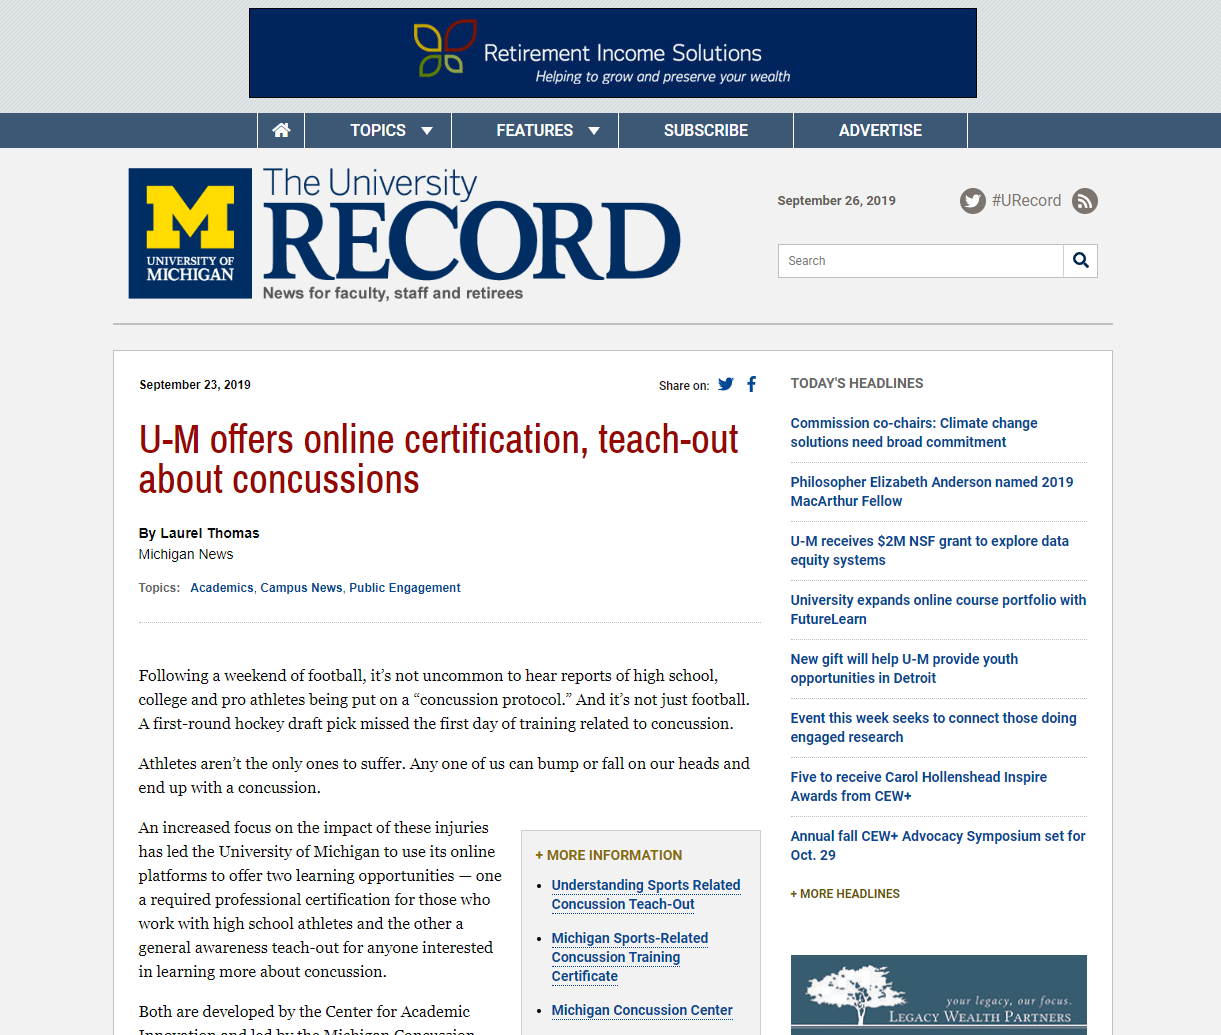 U-M Offers Online Certification, Teach-Out about Concussions